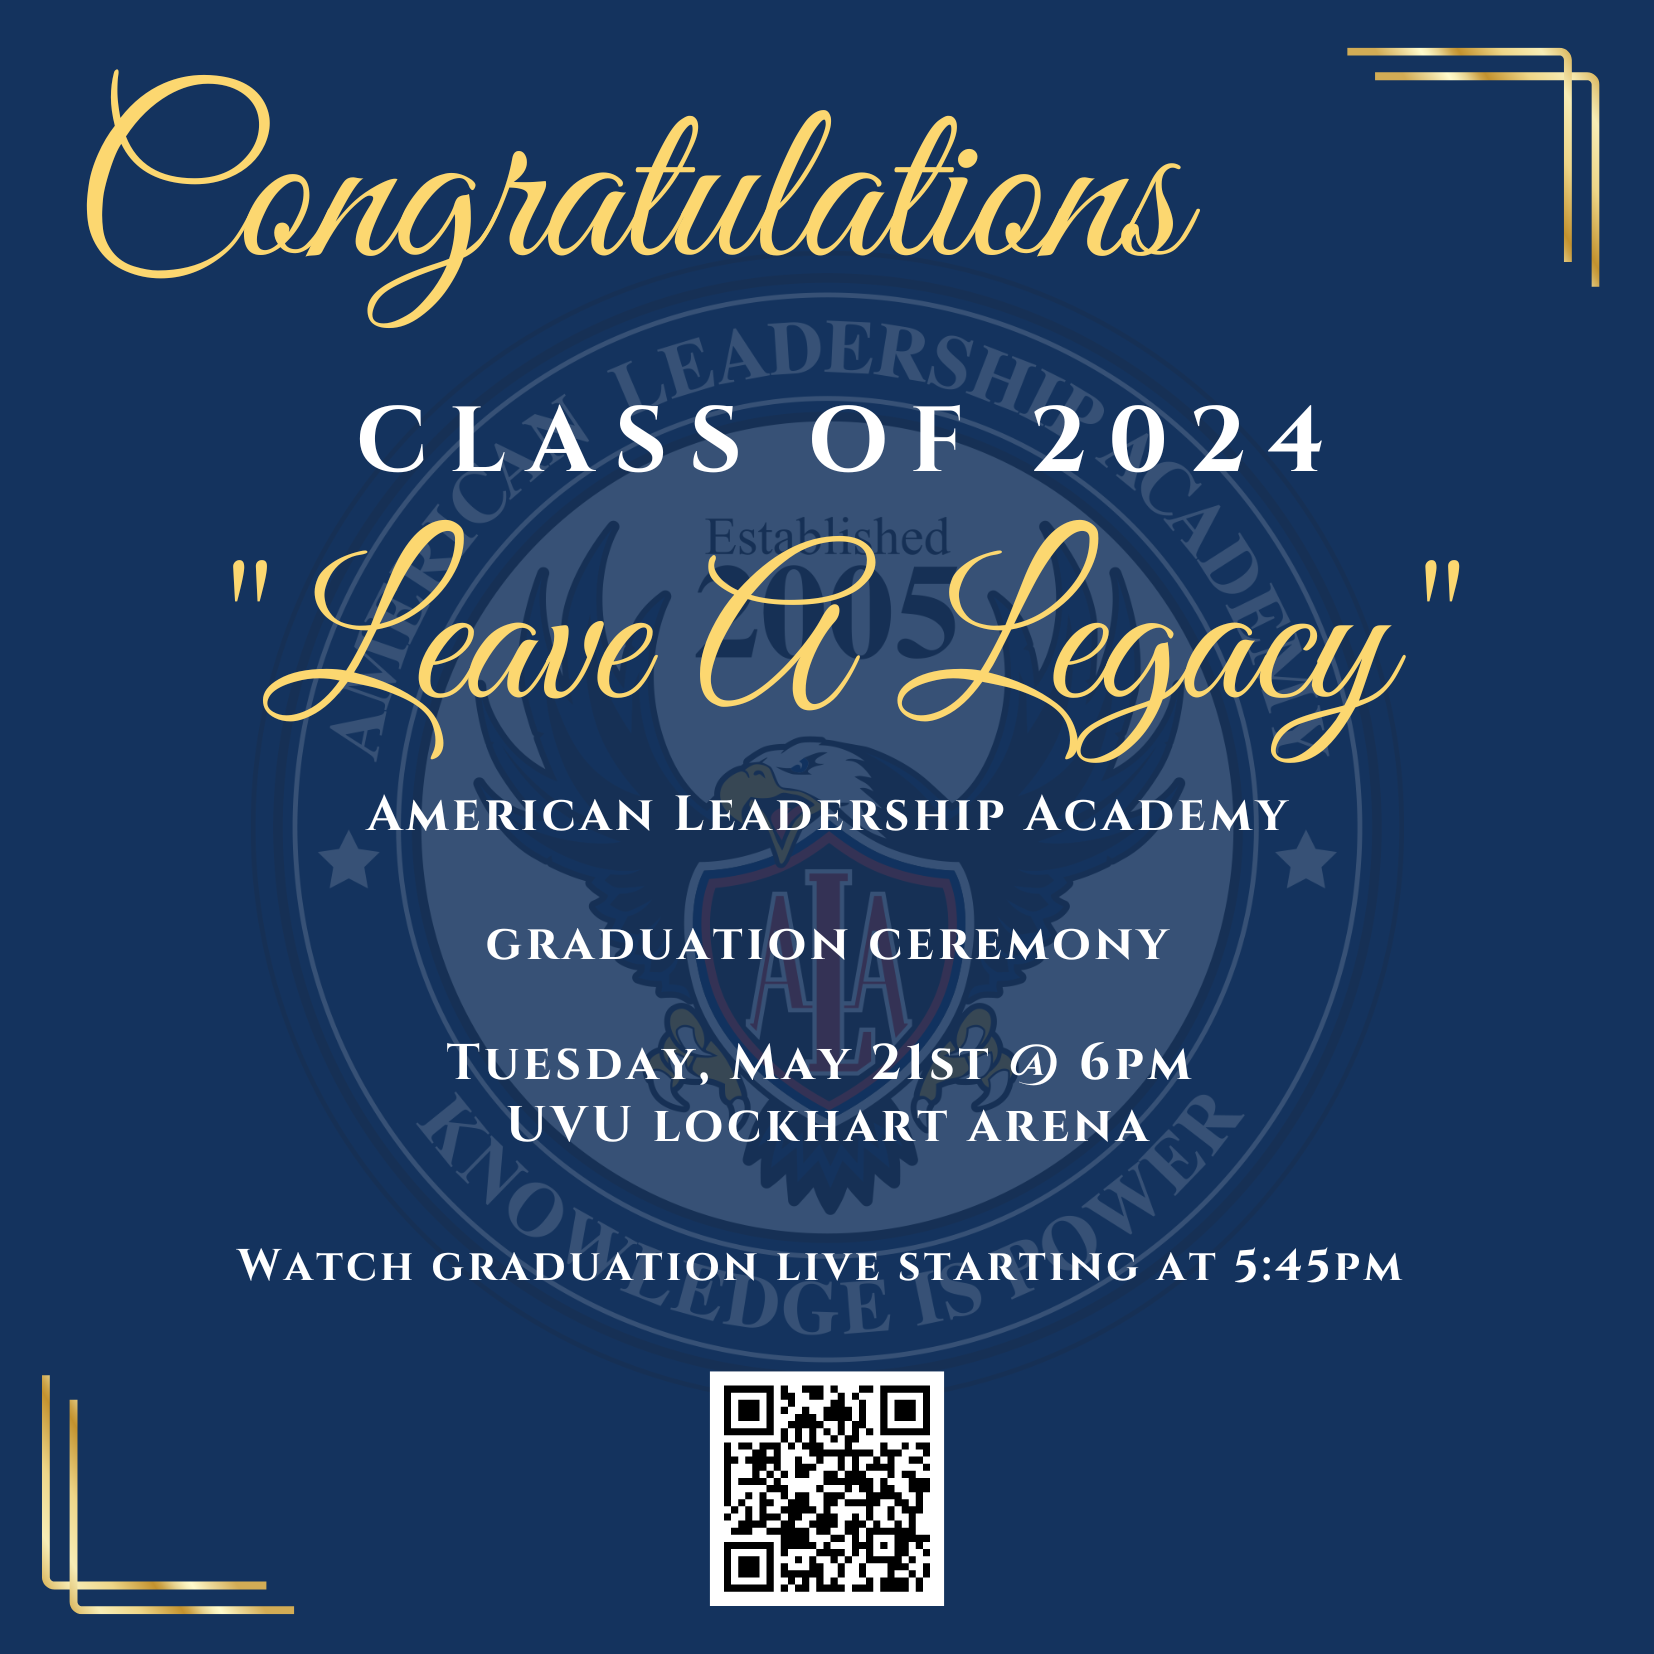 Class of 2024 Graduation Ceremony will be held Tuesday, May 21st @ 6pm in the UVU Lockhart Arena.